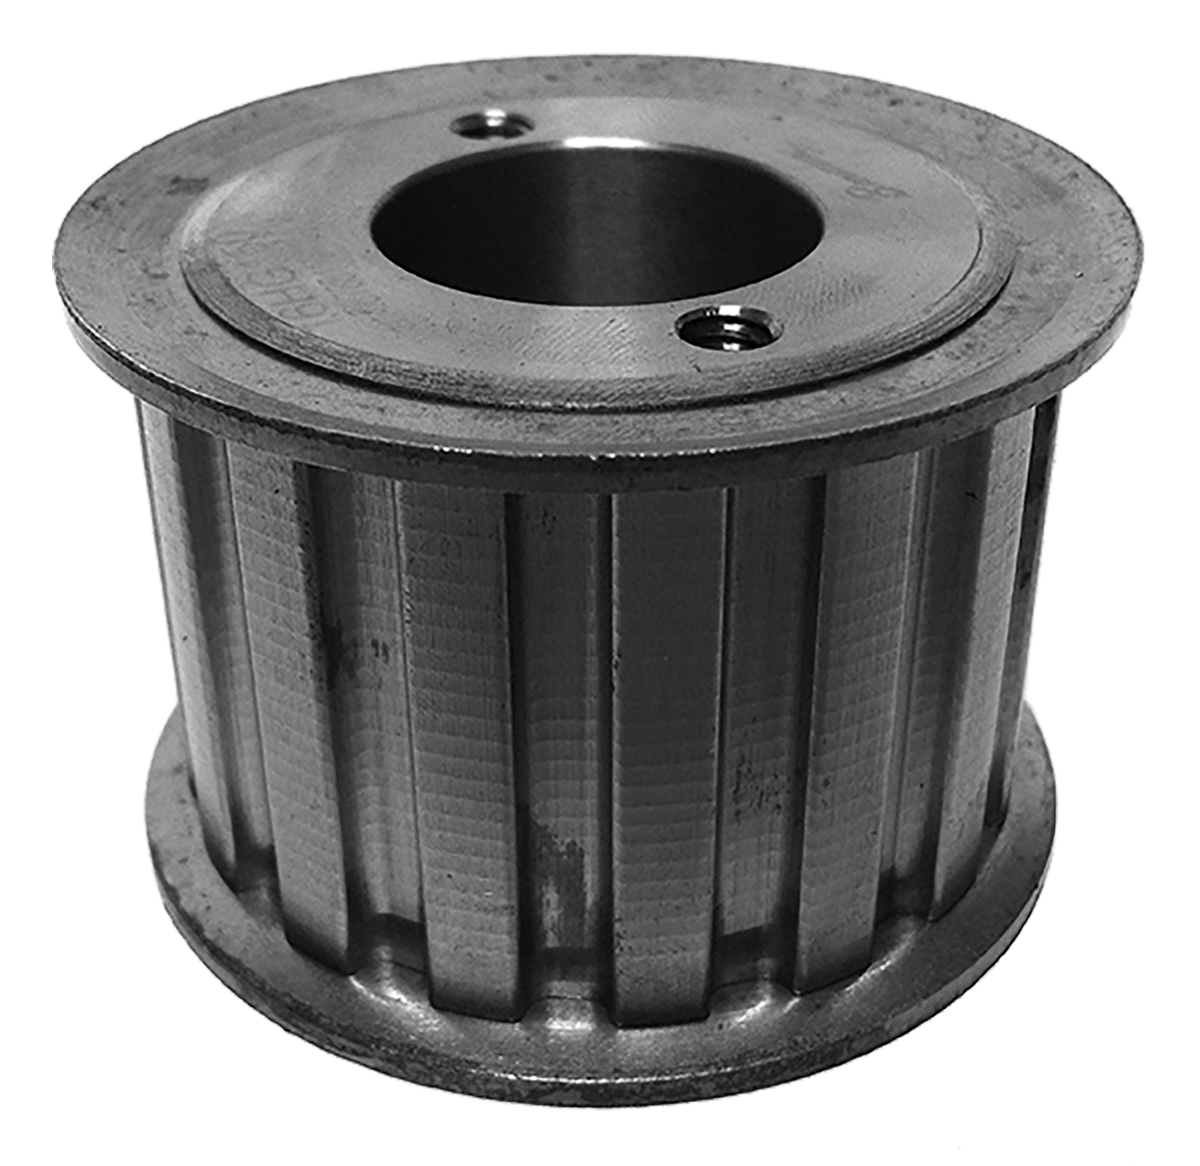 24HP150 - Cast Iron Imperial Pitch Pulleys